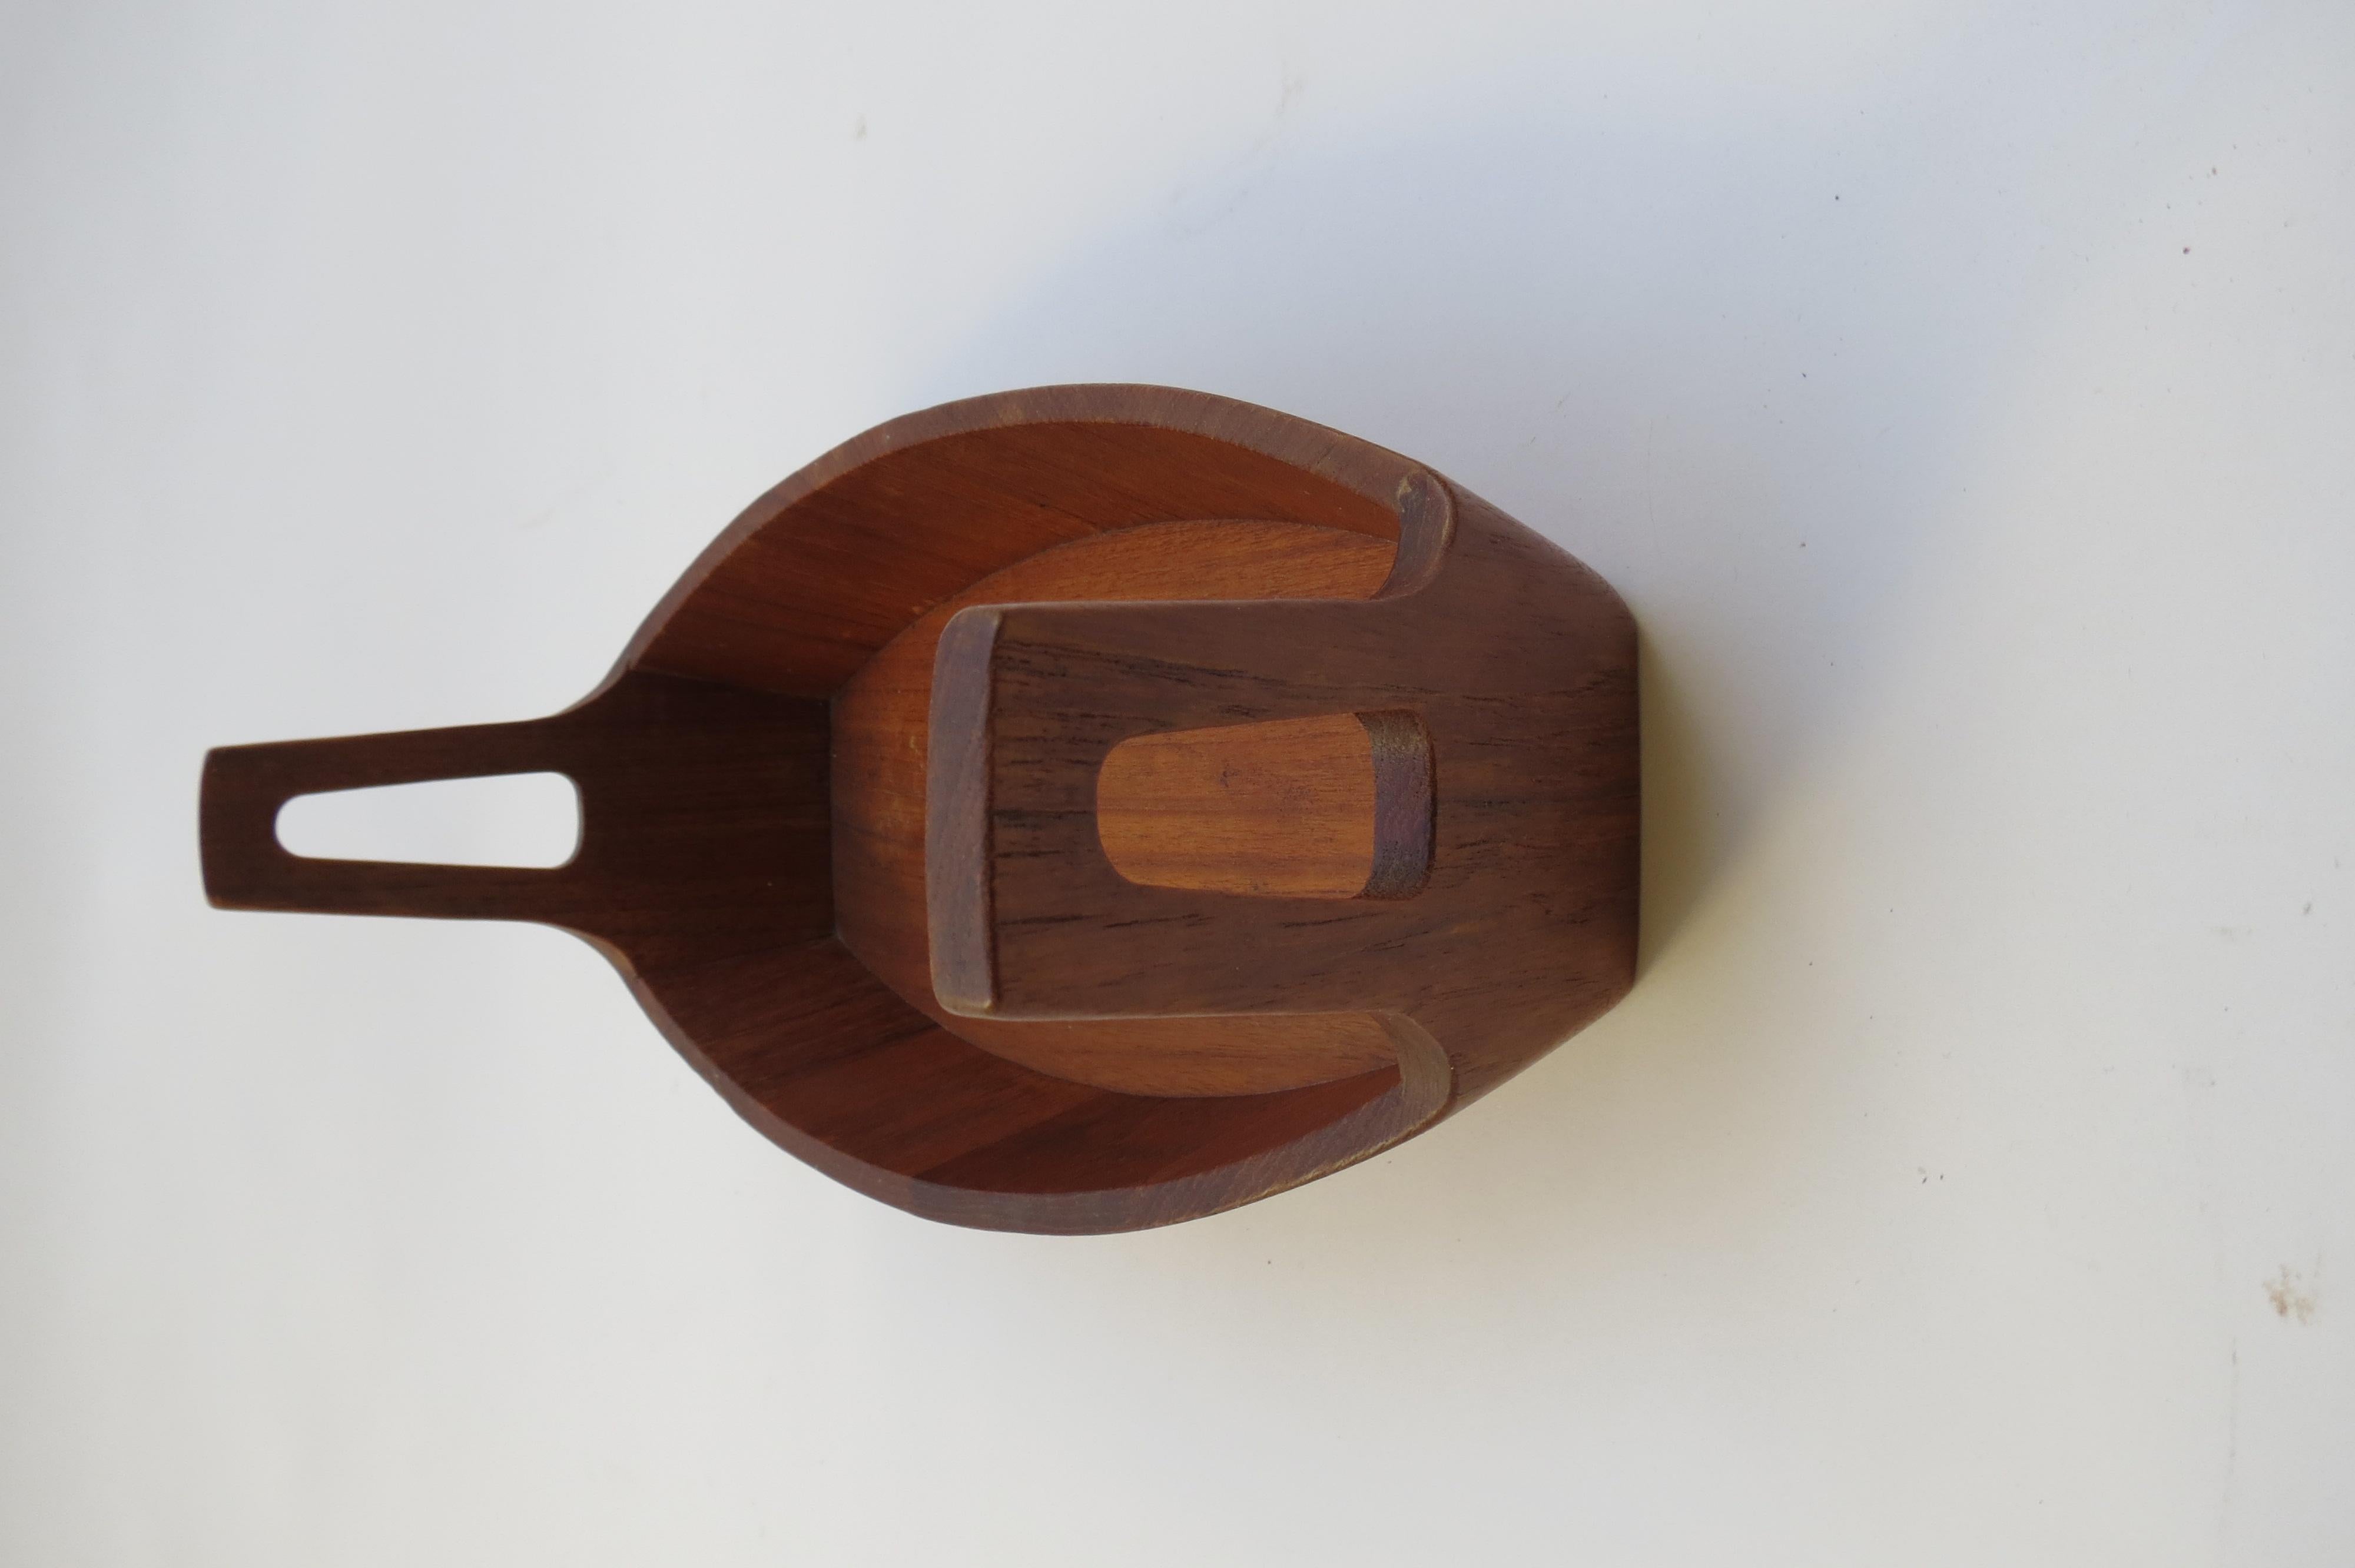 Teak bowl manufactured by Anri Form, Italy. It dates from the 1960s. Retains the manufacturers plaque to the underside. In good overall condition, slight traces of use.